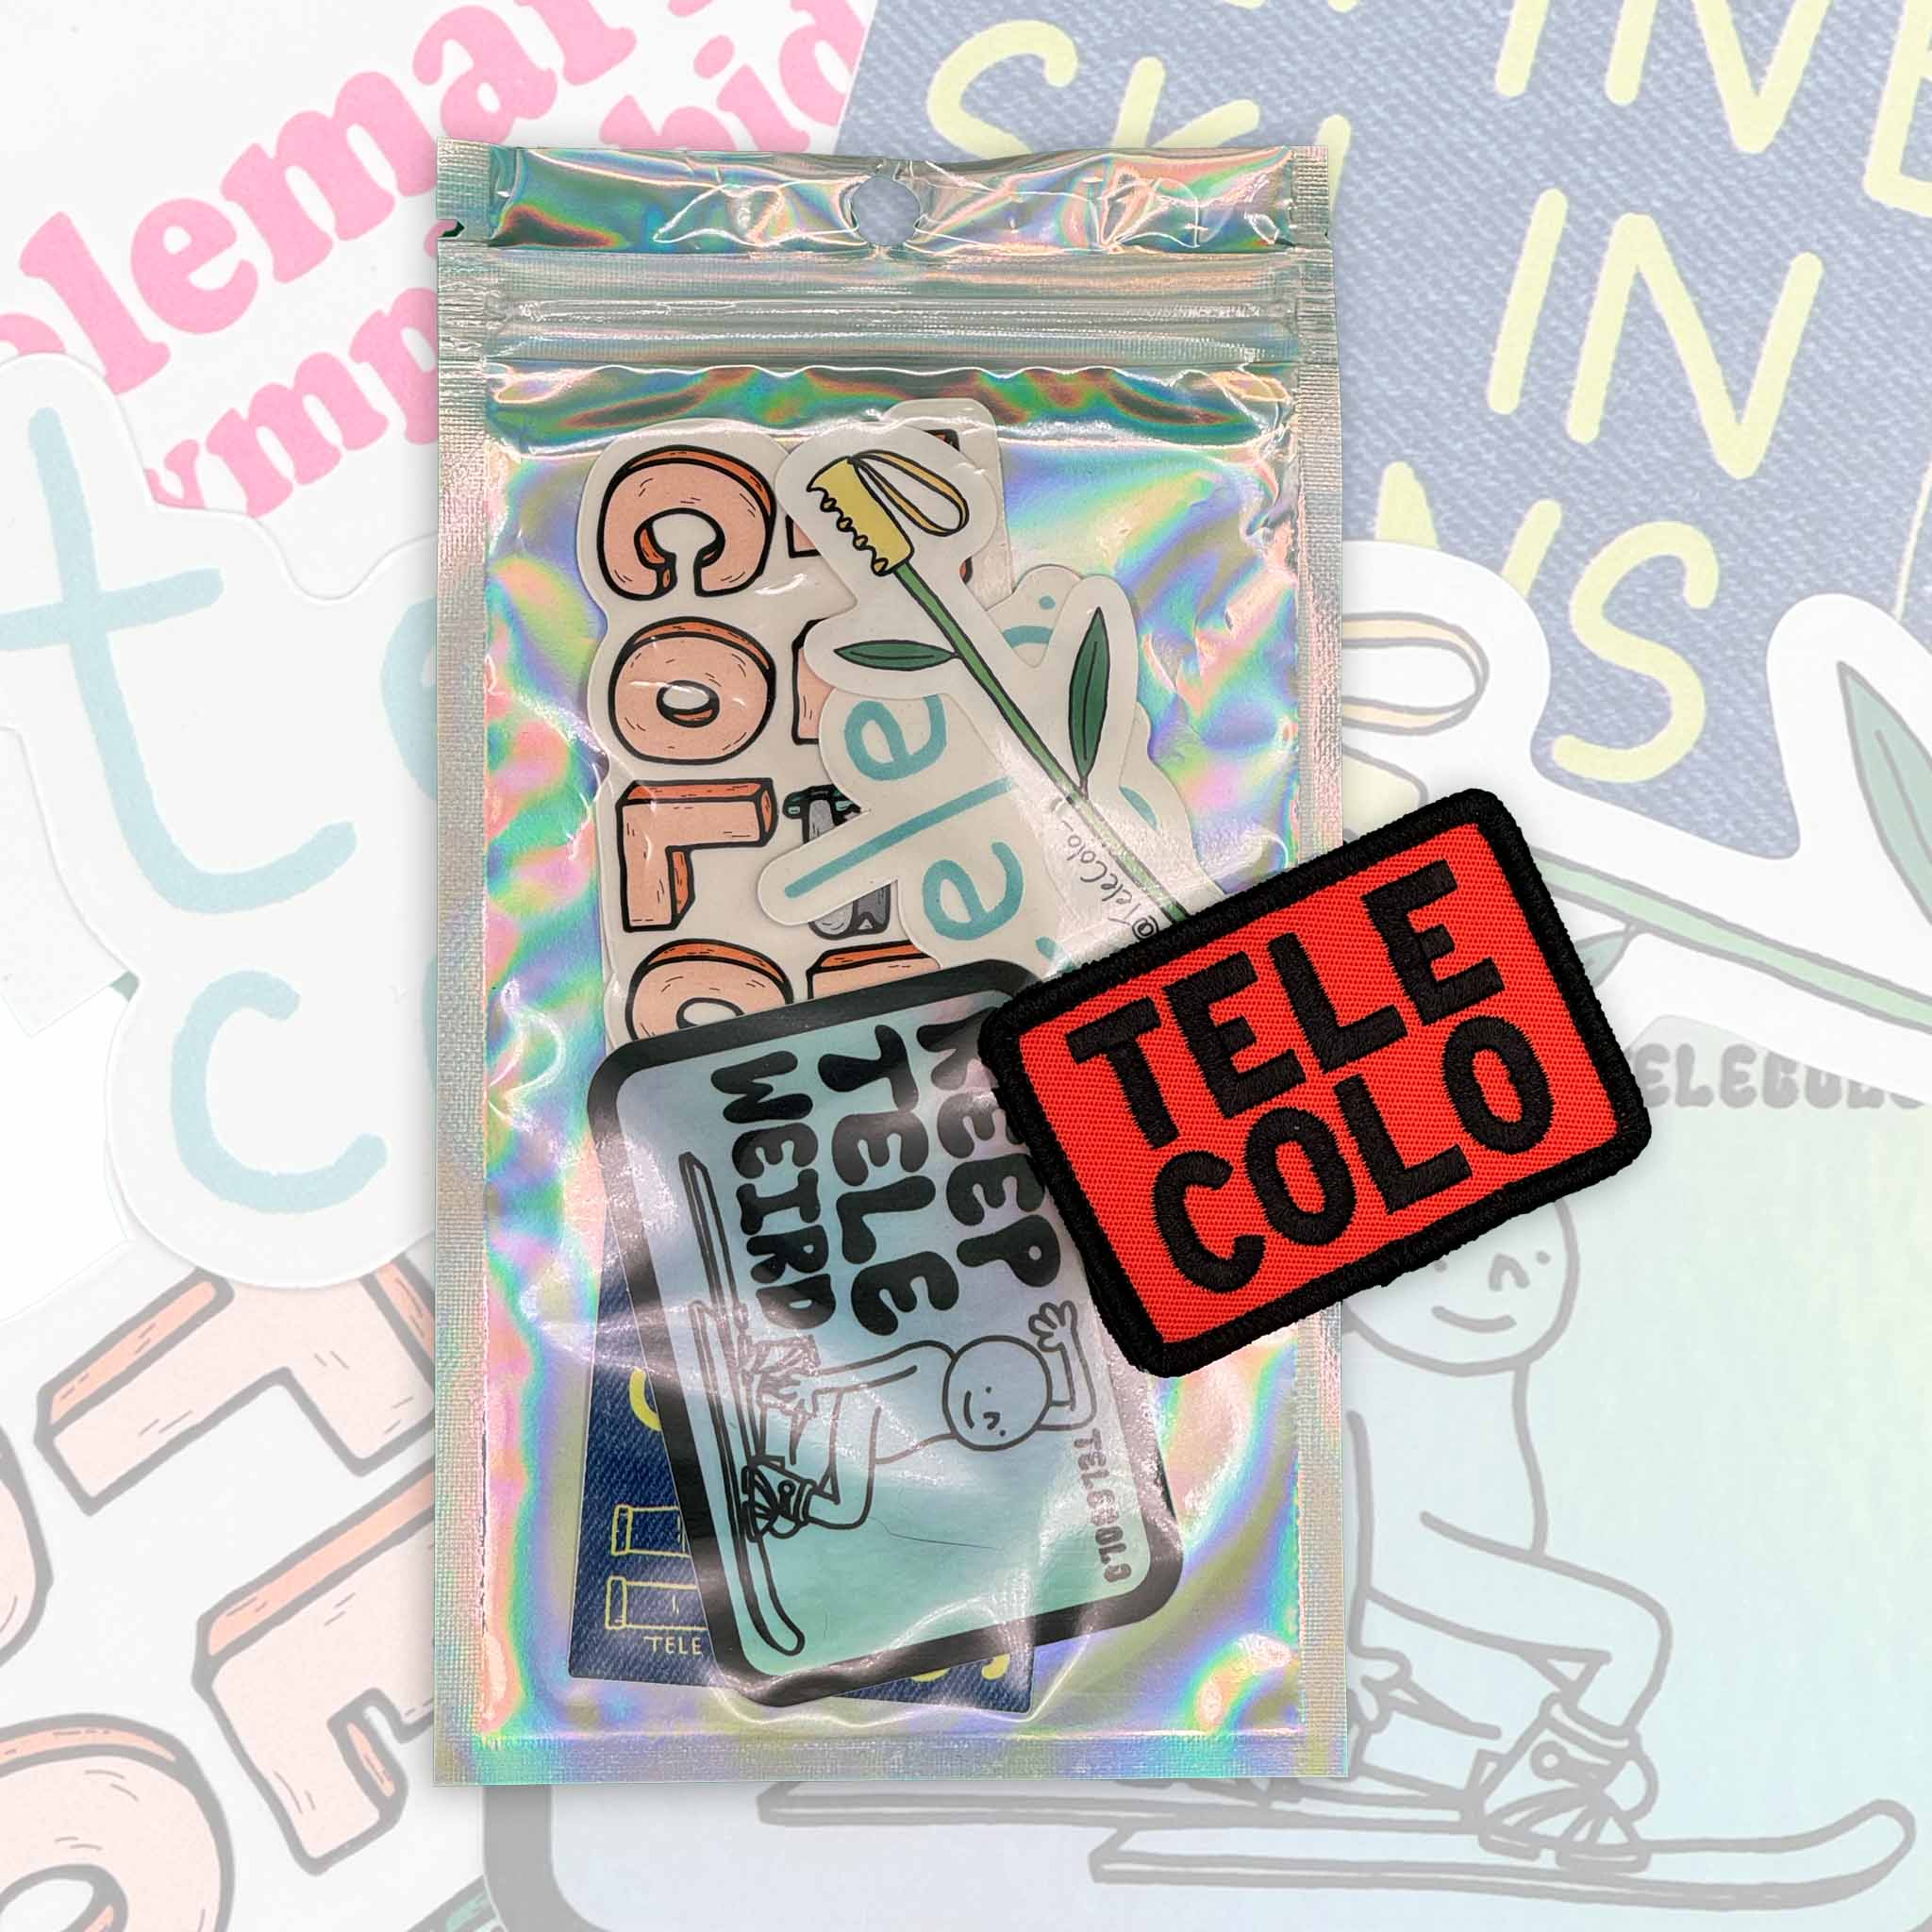 TELE COLO Sticker Pack (6x) w/ Optional Patch